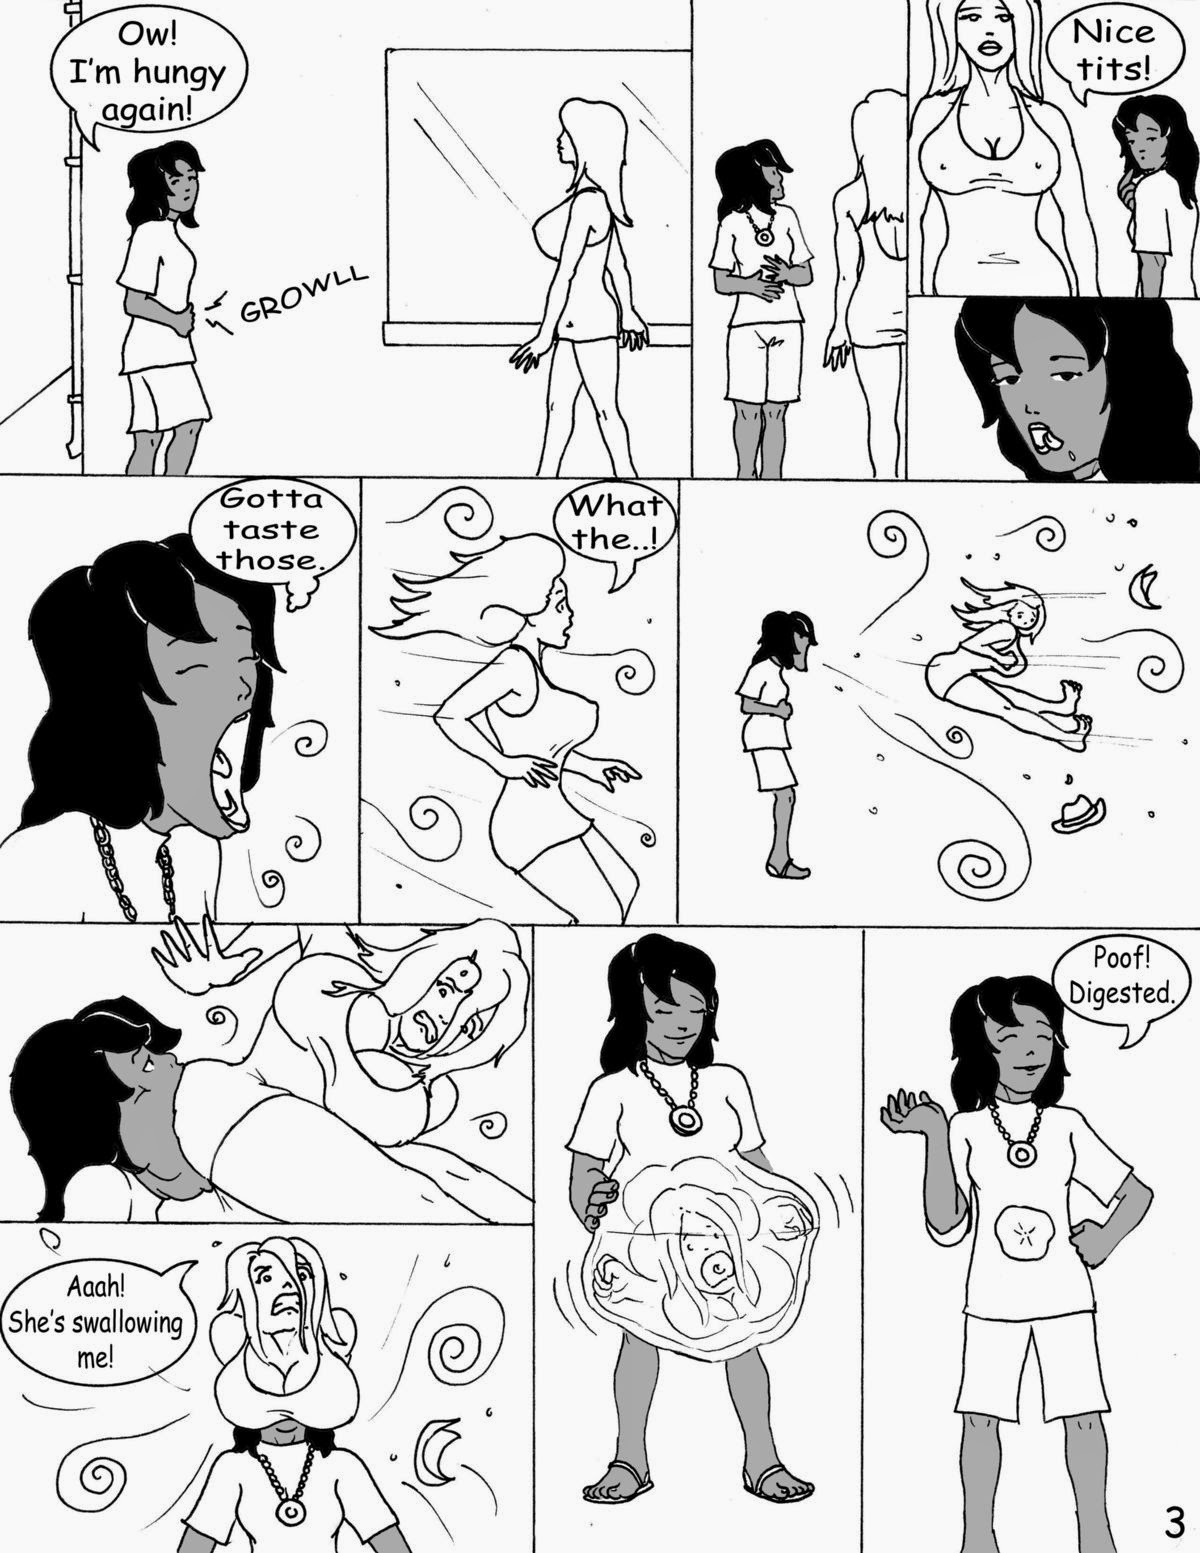 the full comics(its much longer and have several FMG scenes in it) and many...